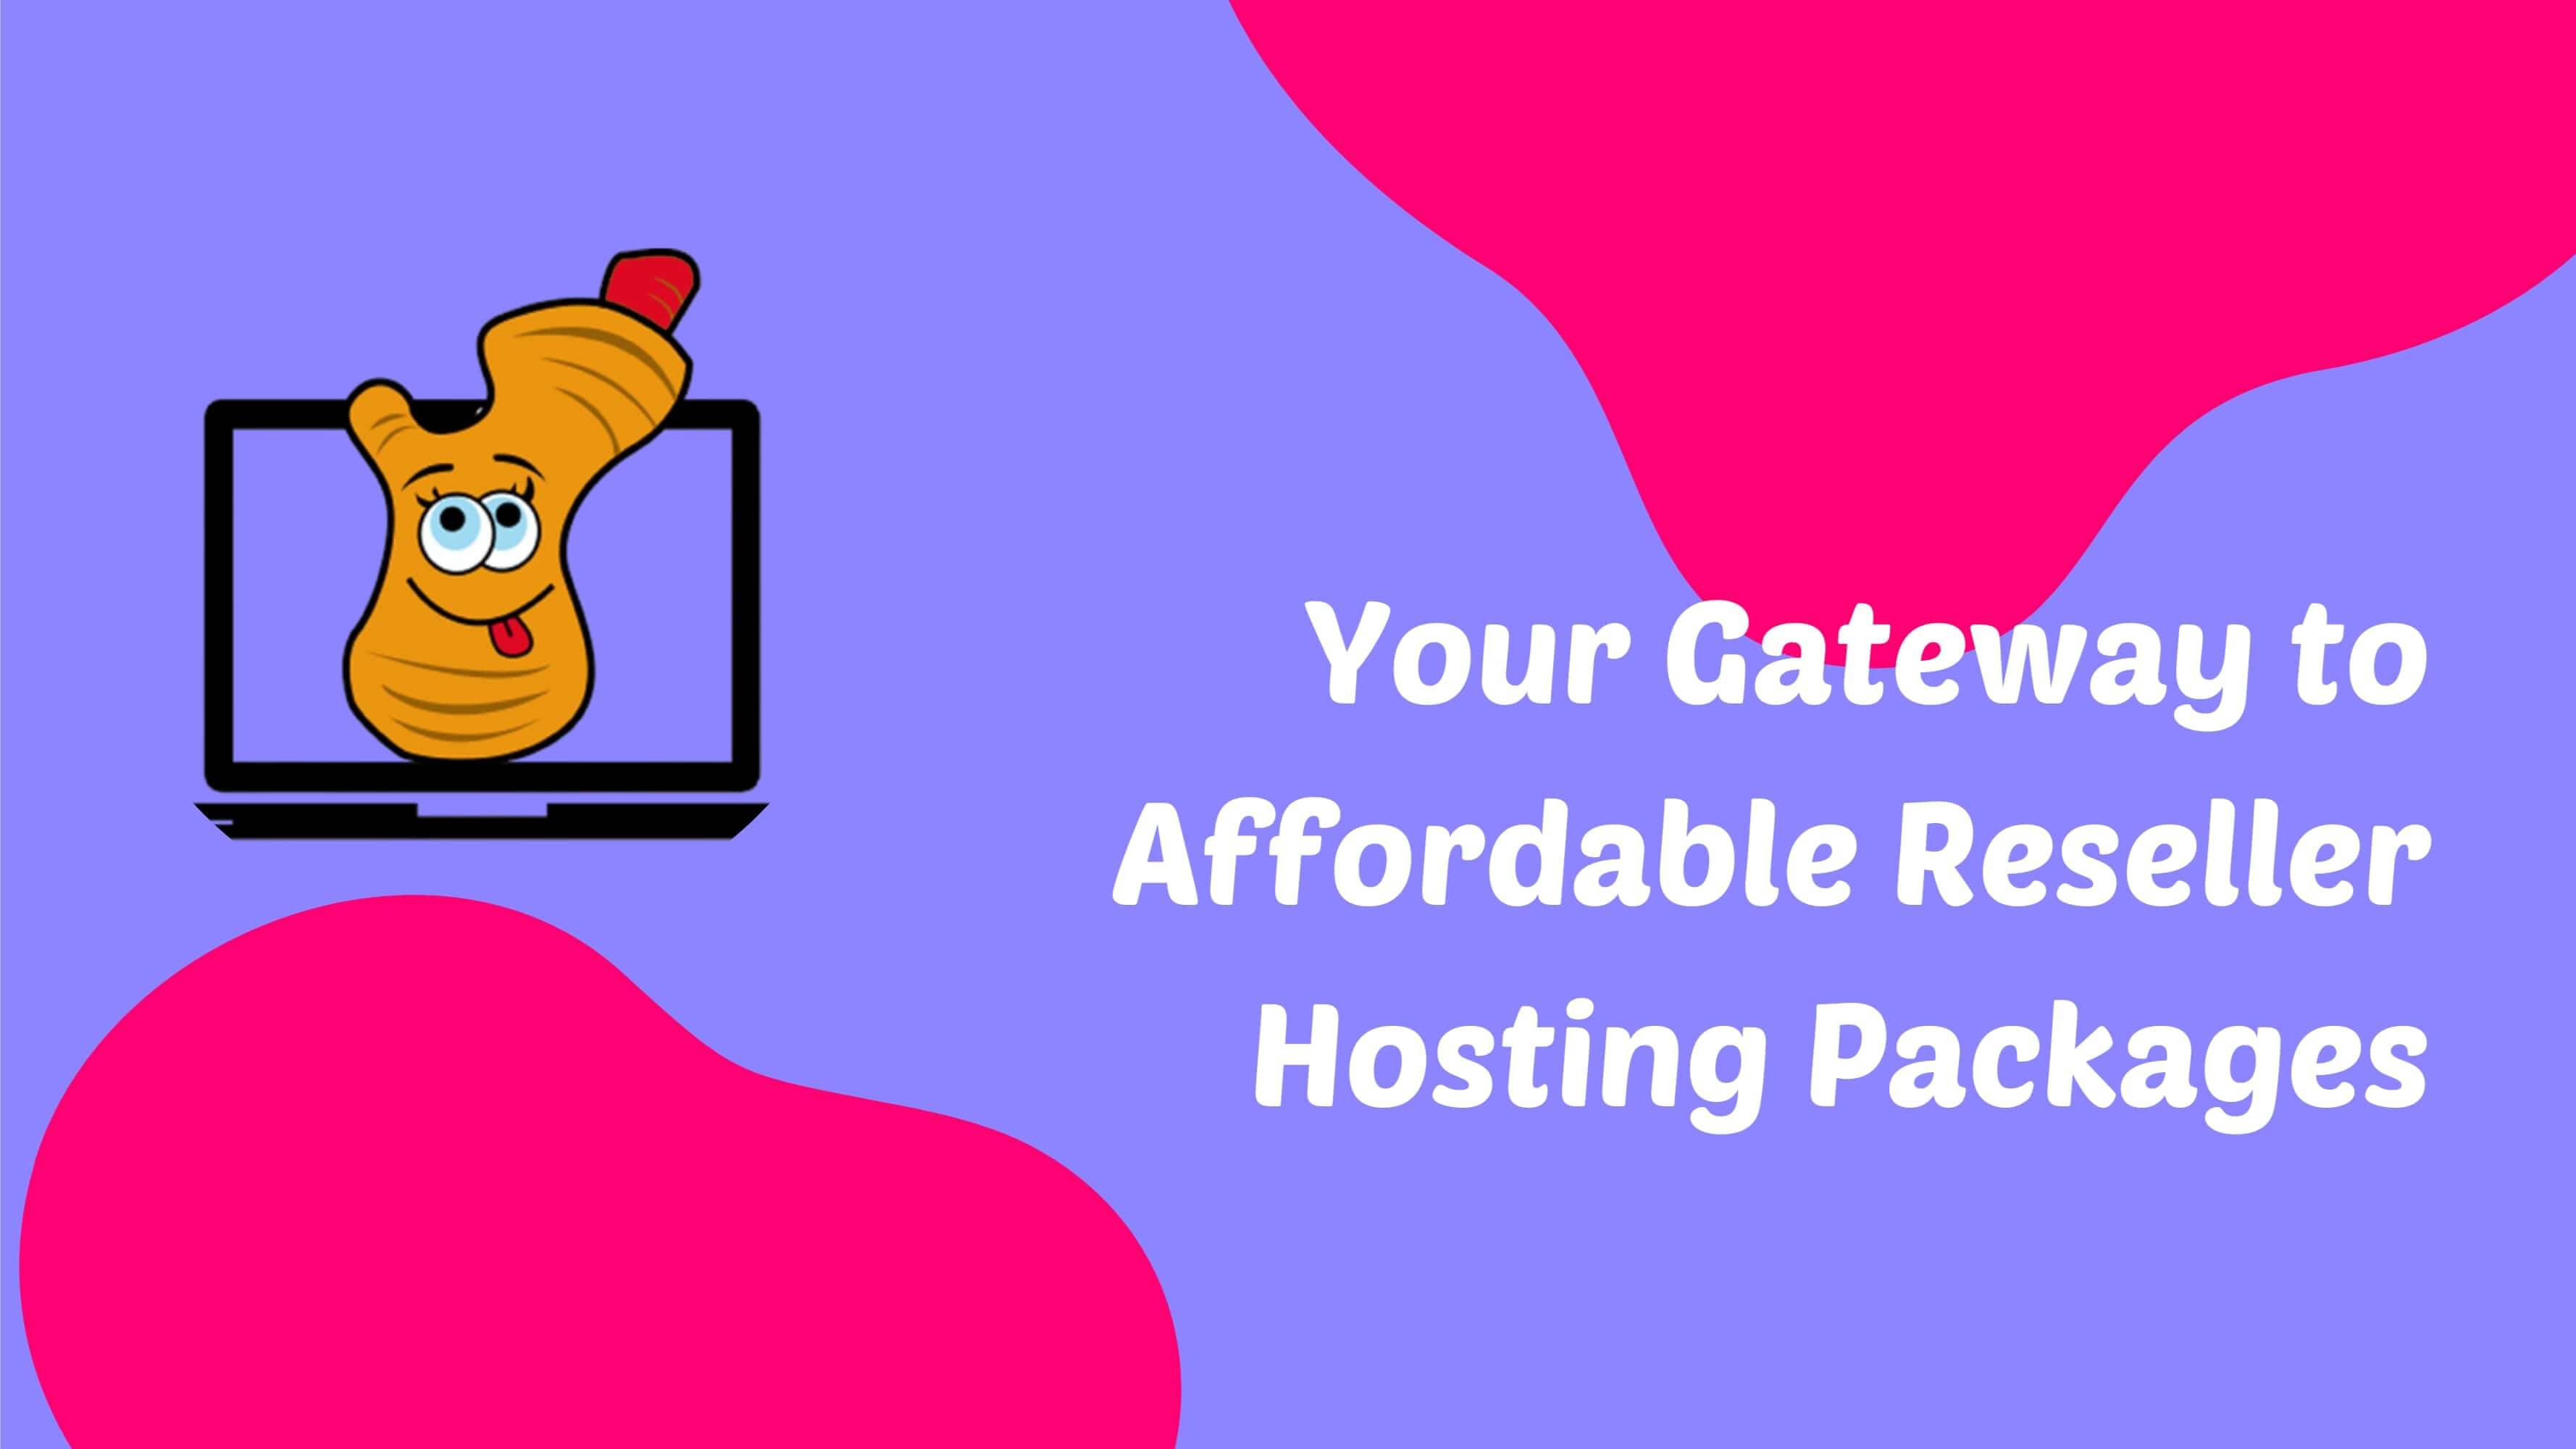 Your Gateway to Affordable Reseller Hosting Packages